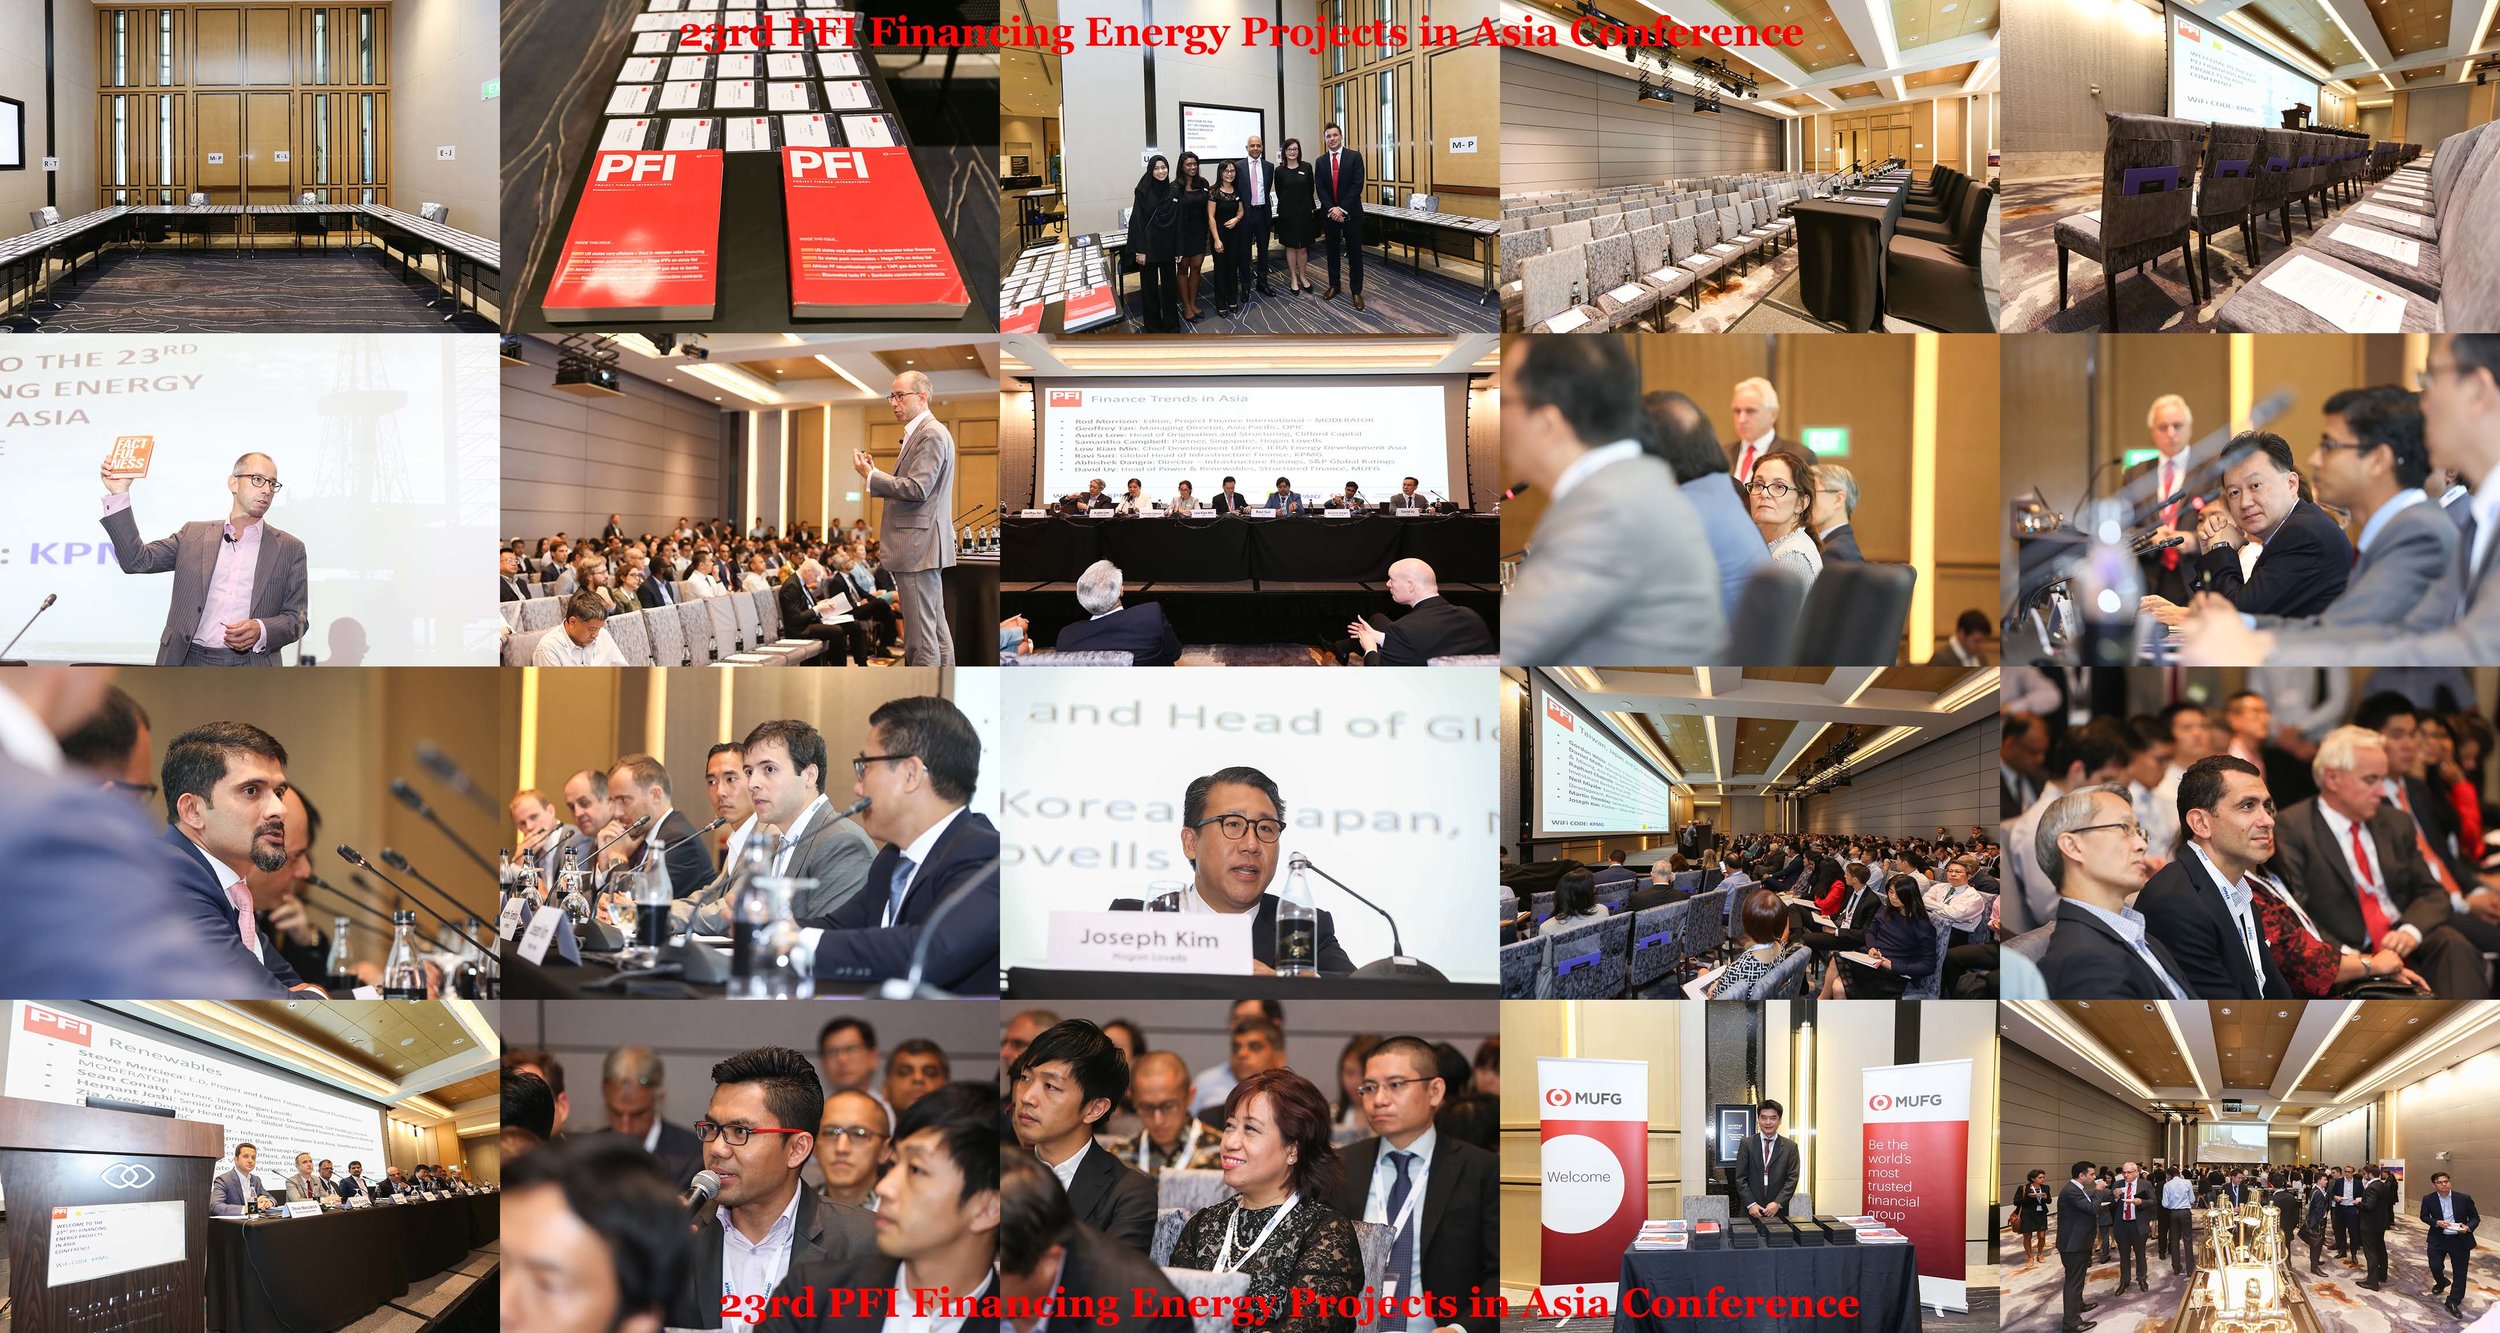 Event seminar photography service in Singapore